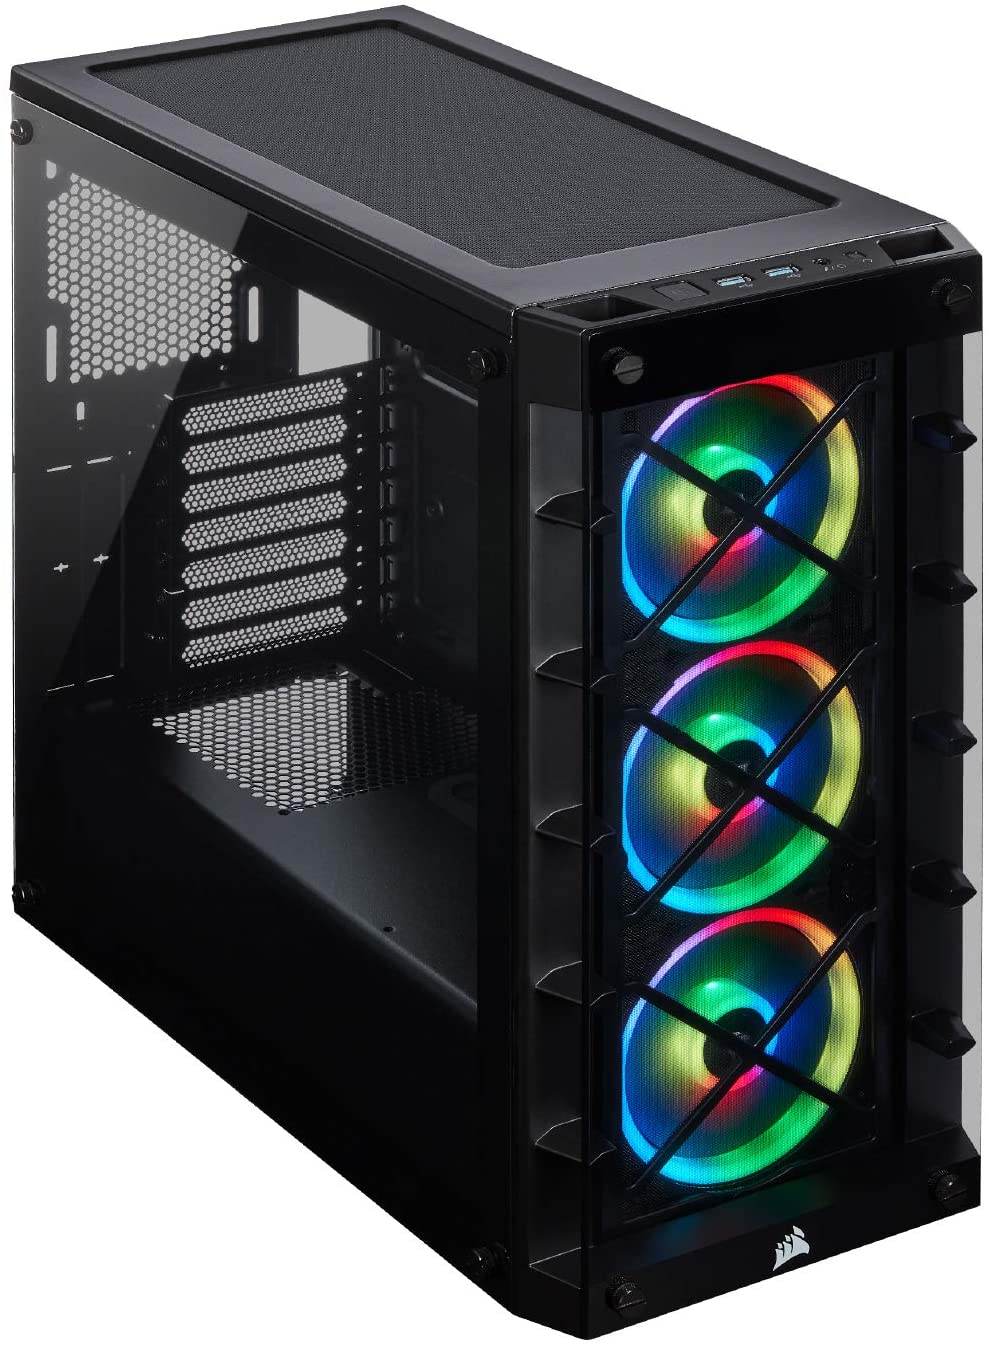 Corsair Icue 465X RGB Mid-Tower ATX Smart Case $104.99 + Free Shipping @ Amazon & Best Buy